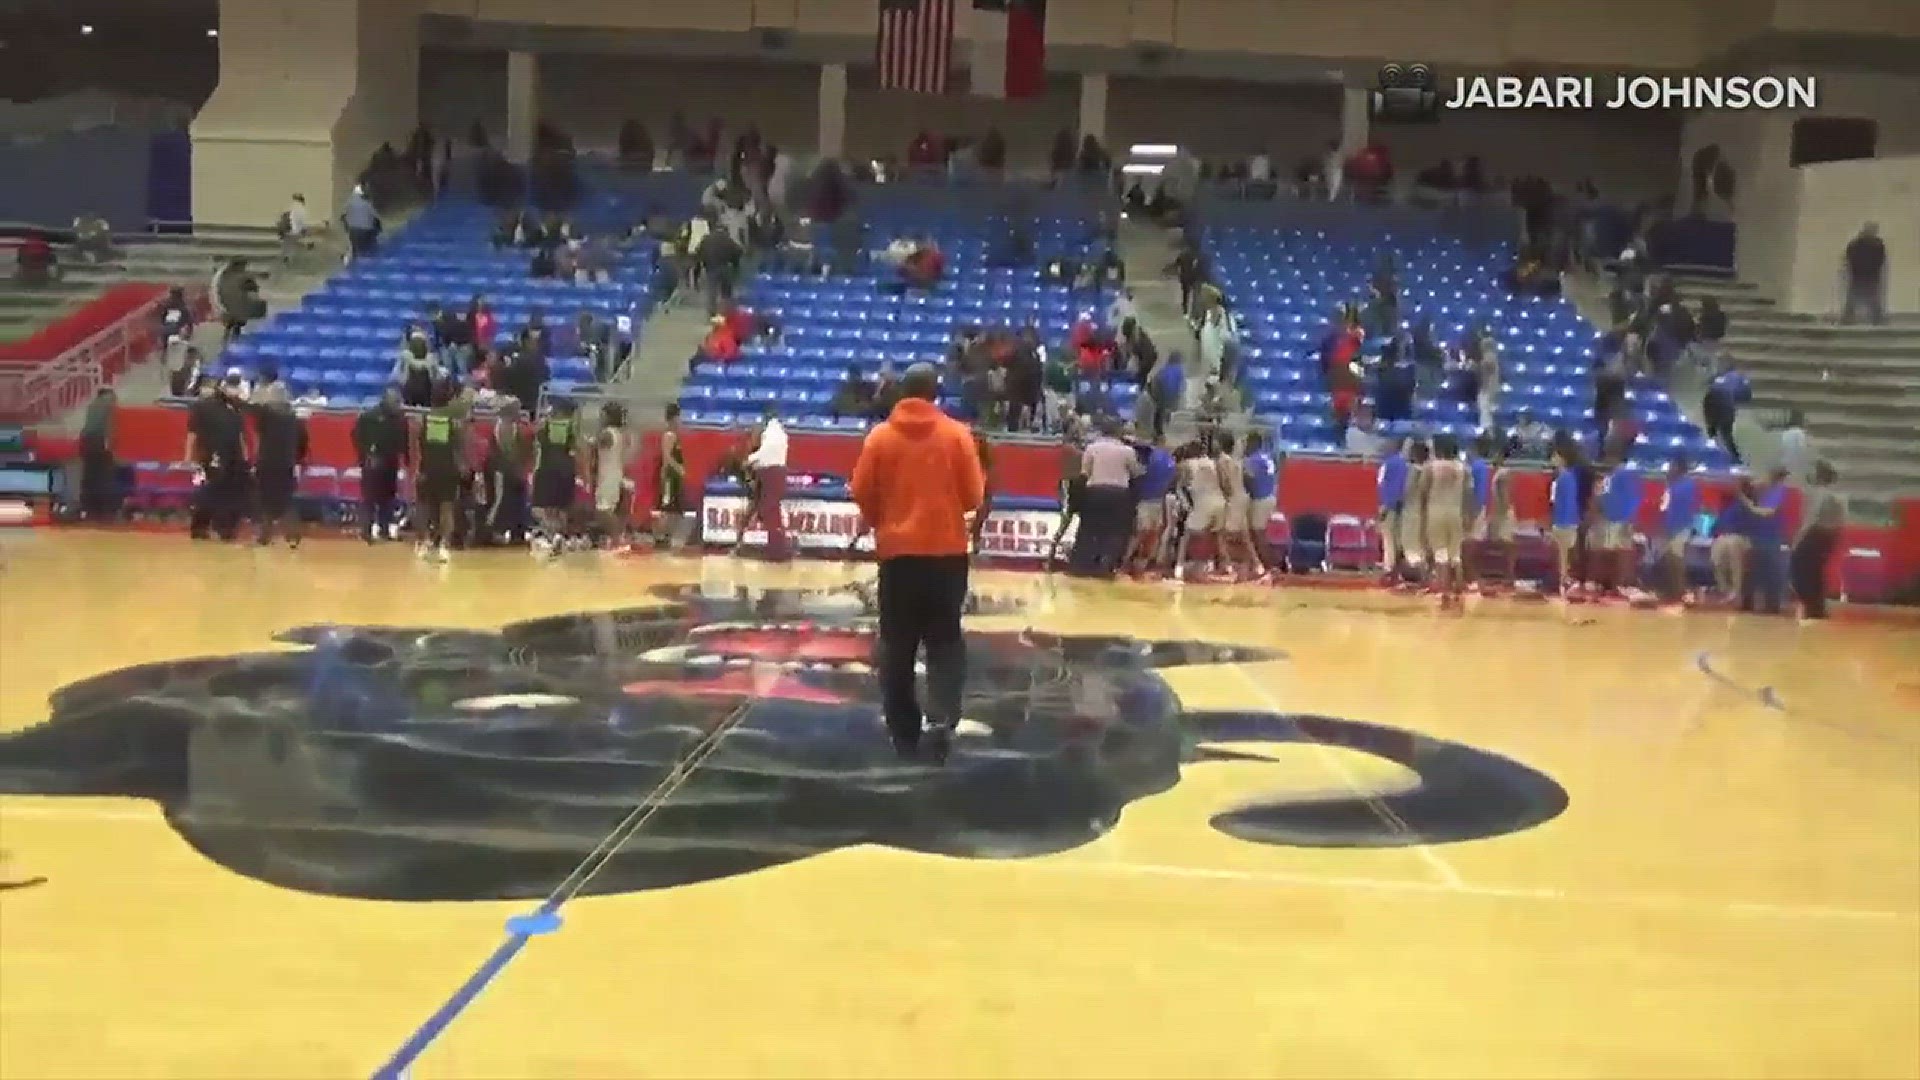 Watch a fight break out following No. 7 Duncanville's win over No. 6 DeSoto Tuesday evening. Credit: Jabari Johnson